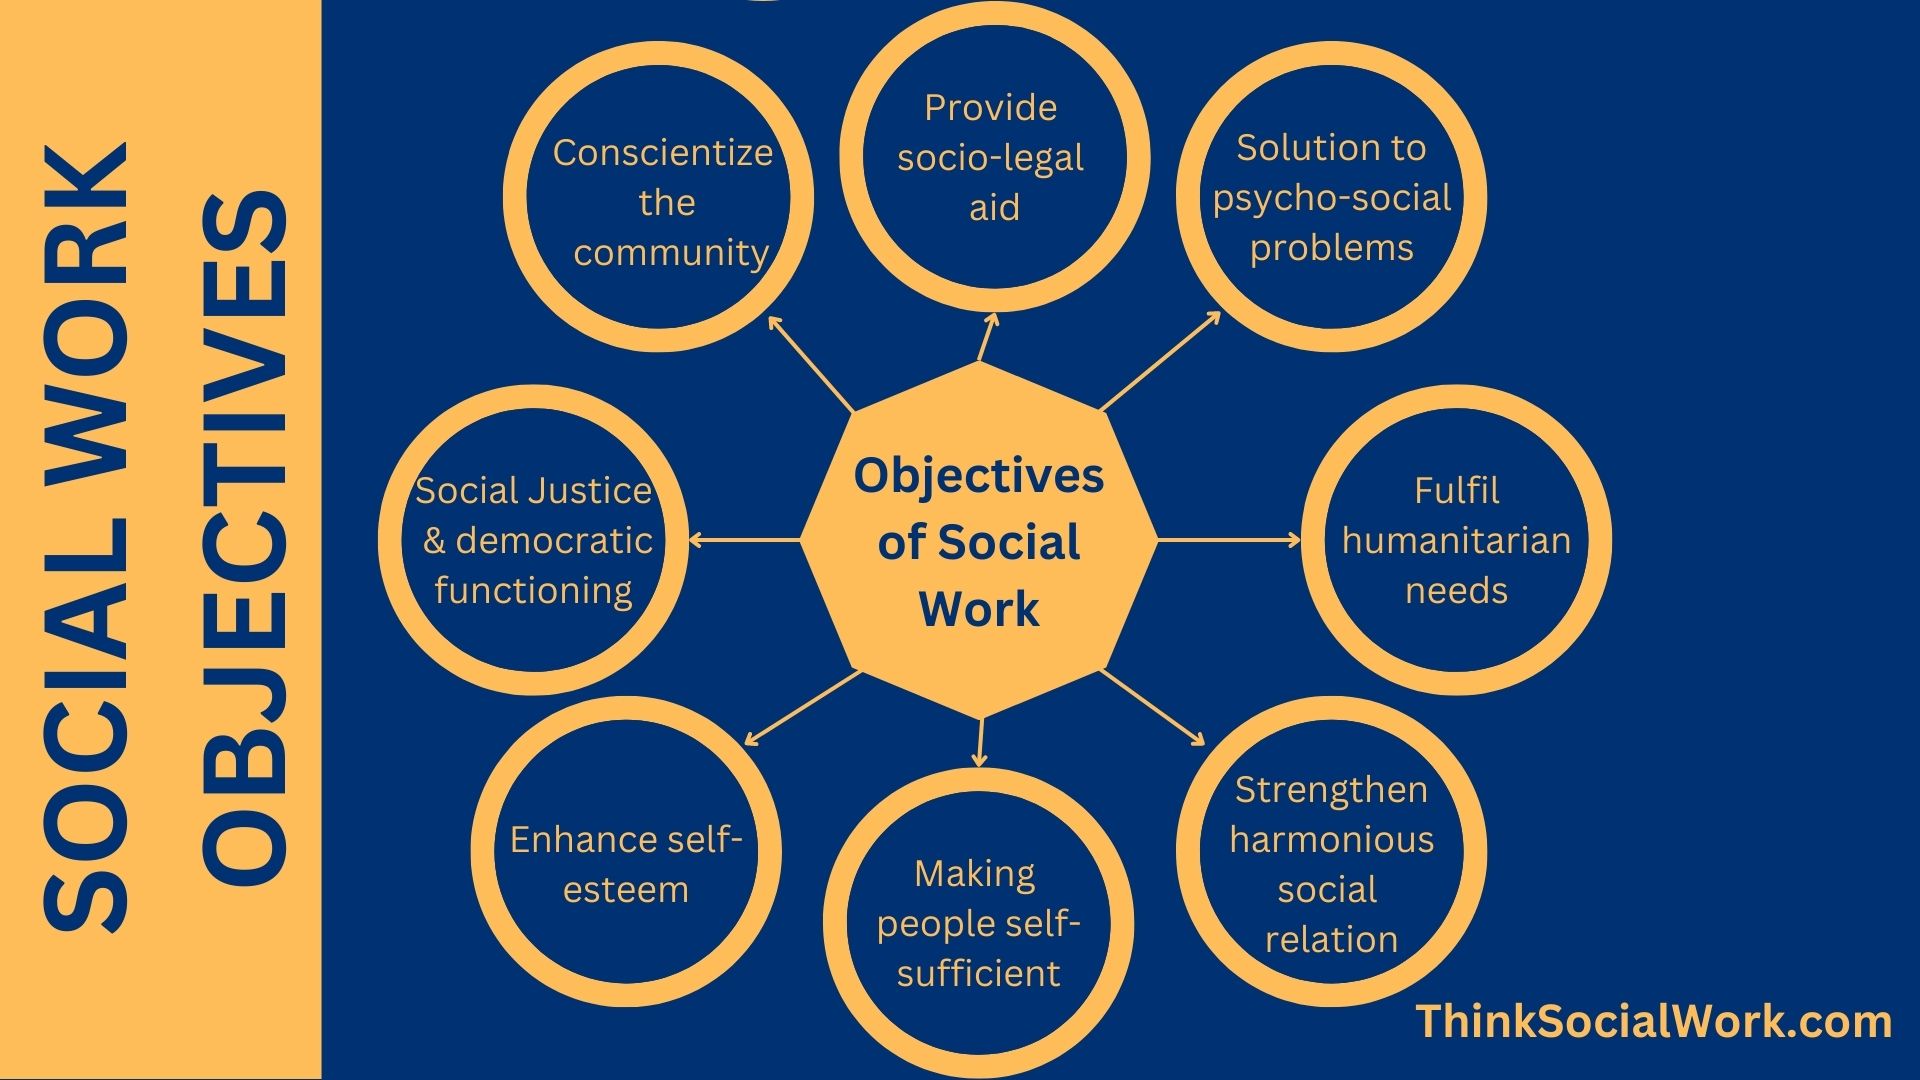 Objectives of Social Work and its Purpose